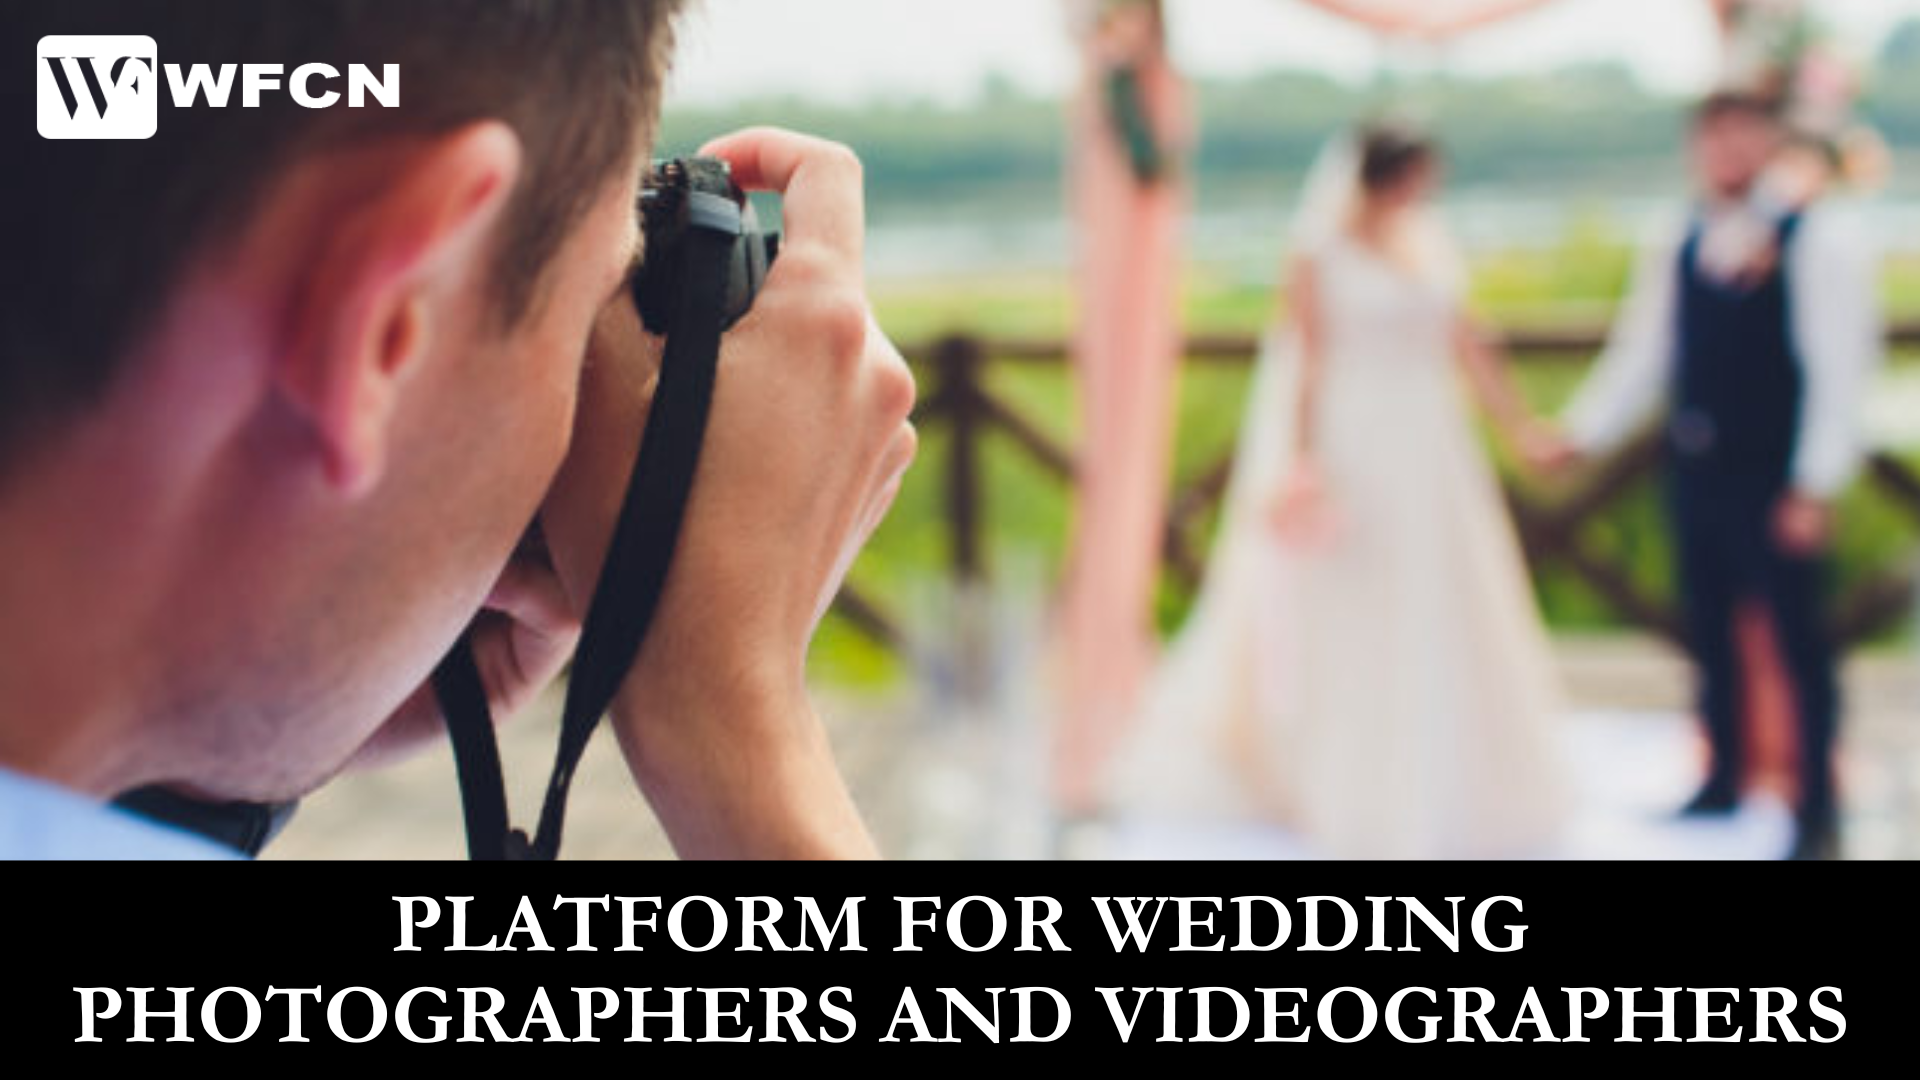 Opportunities for Wedding Photographers and Videographers